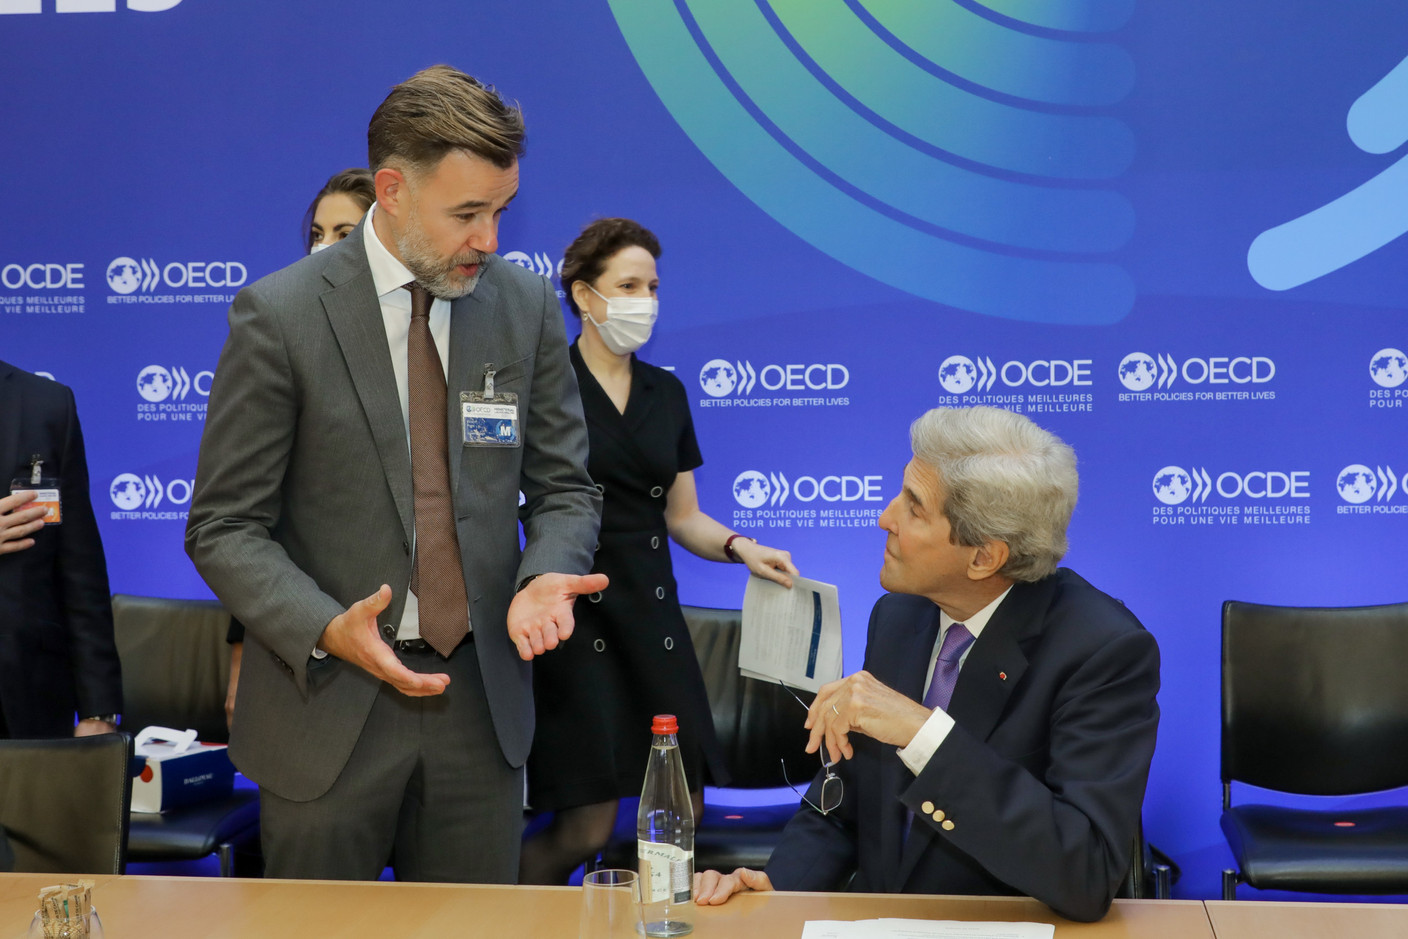 (from l. to r.) Franz Fayot, Minister of the Economy; John Kerry, Special Envoy of the President of the United States of America for Climate Change (chairing the council meeting at ministerial level) SIP/LUC DEFLORENNE